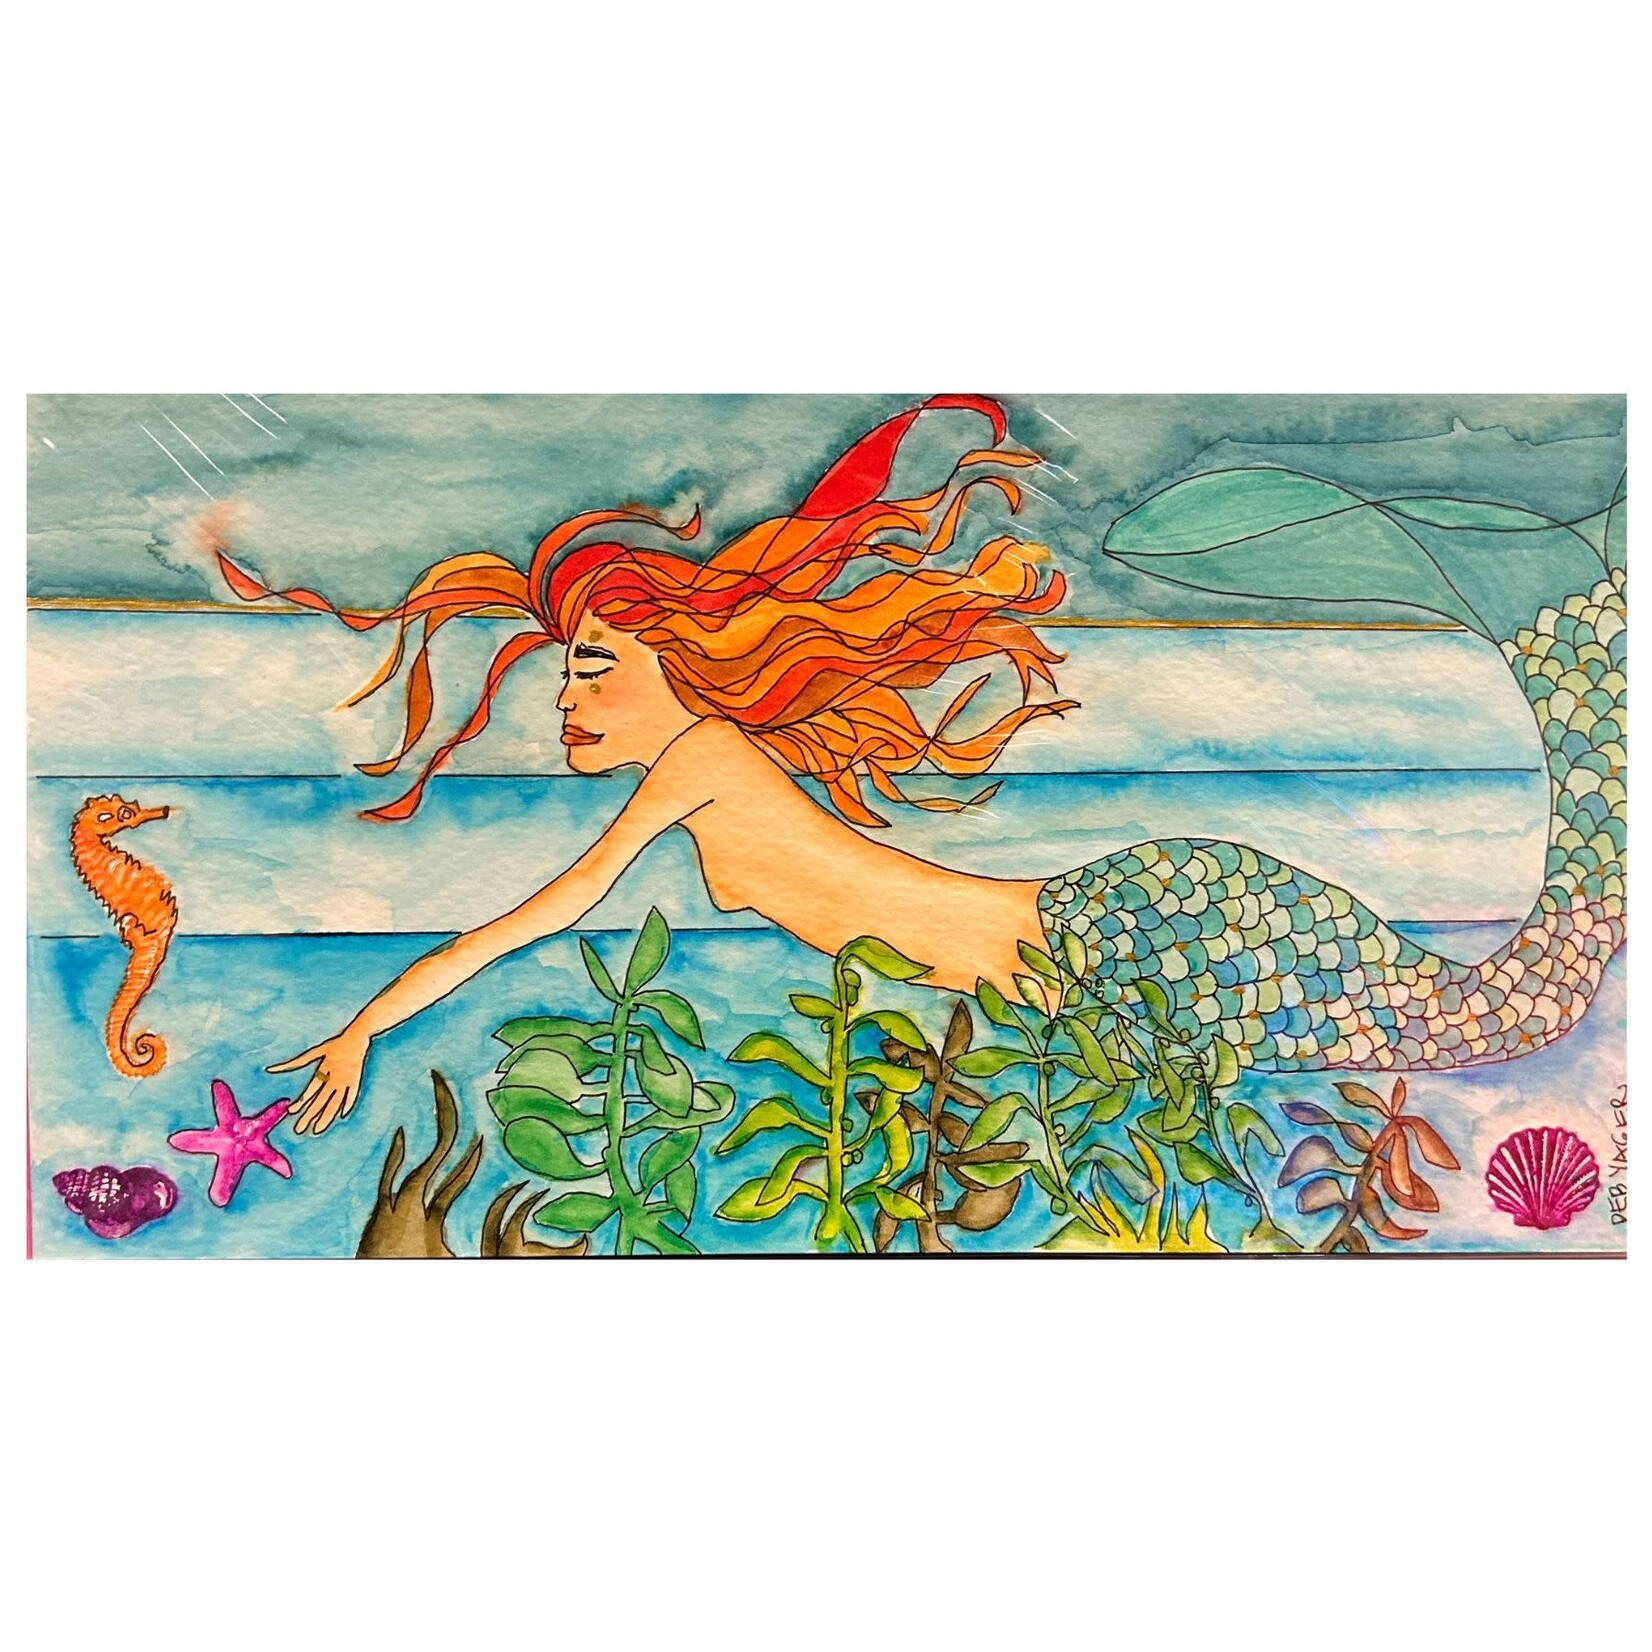 Outside The Box 11x6 "Mermaid with Small Seahorse" Original Watercolor Artwork